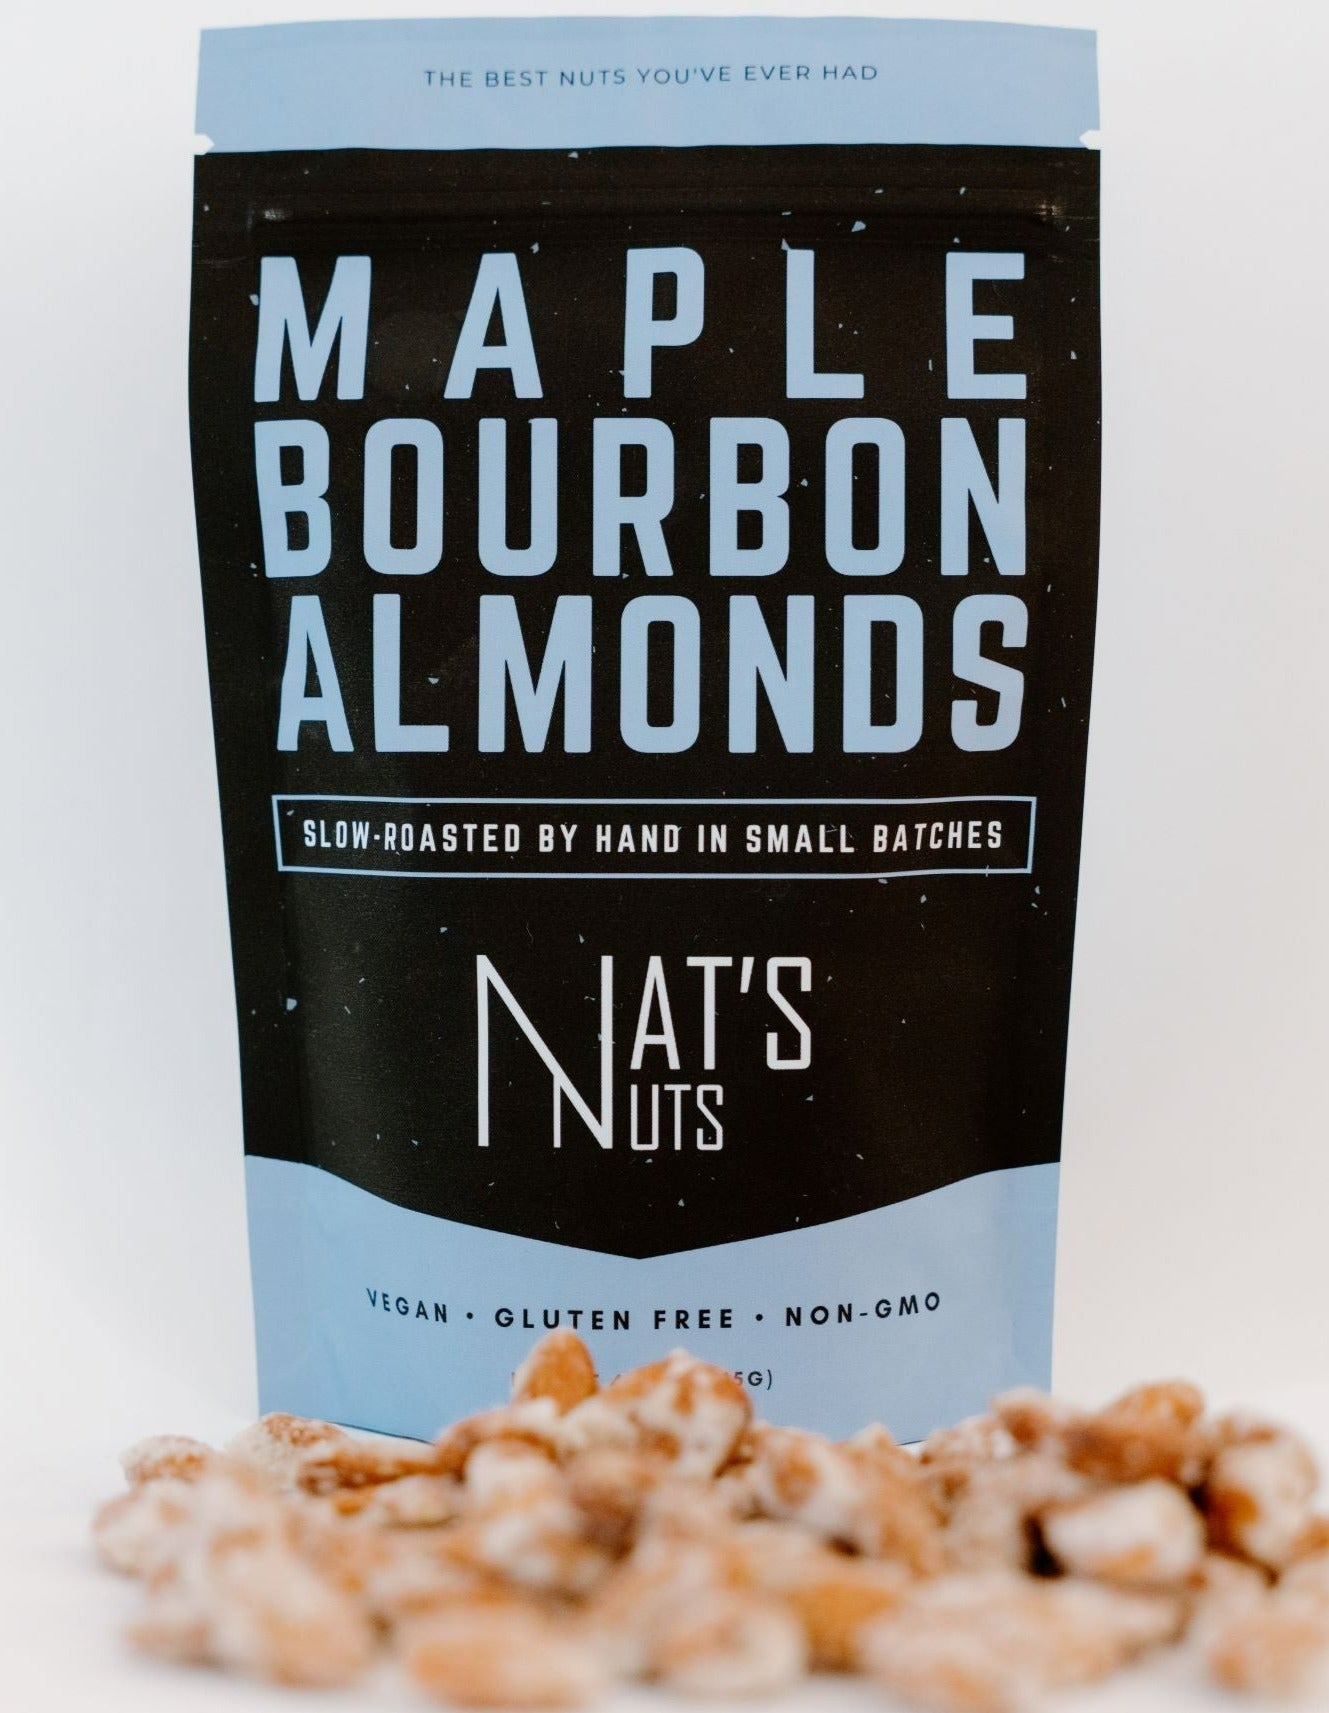 Maple Bourbon Almonds by Nat's Nuts